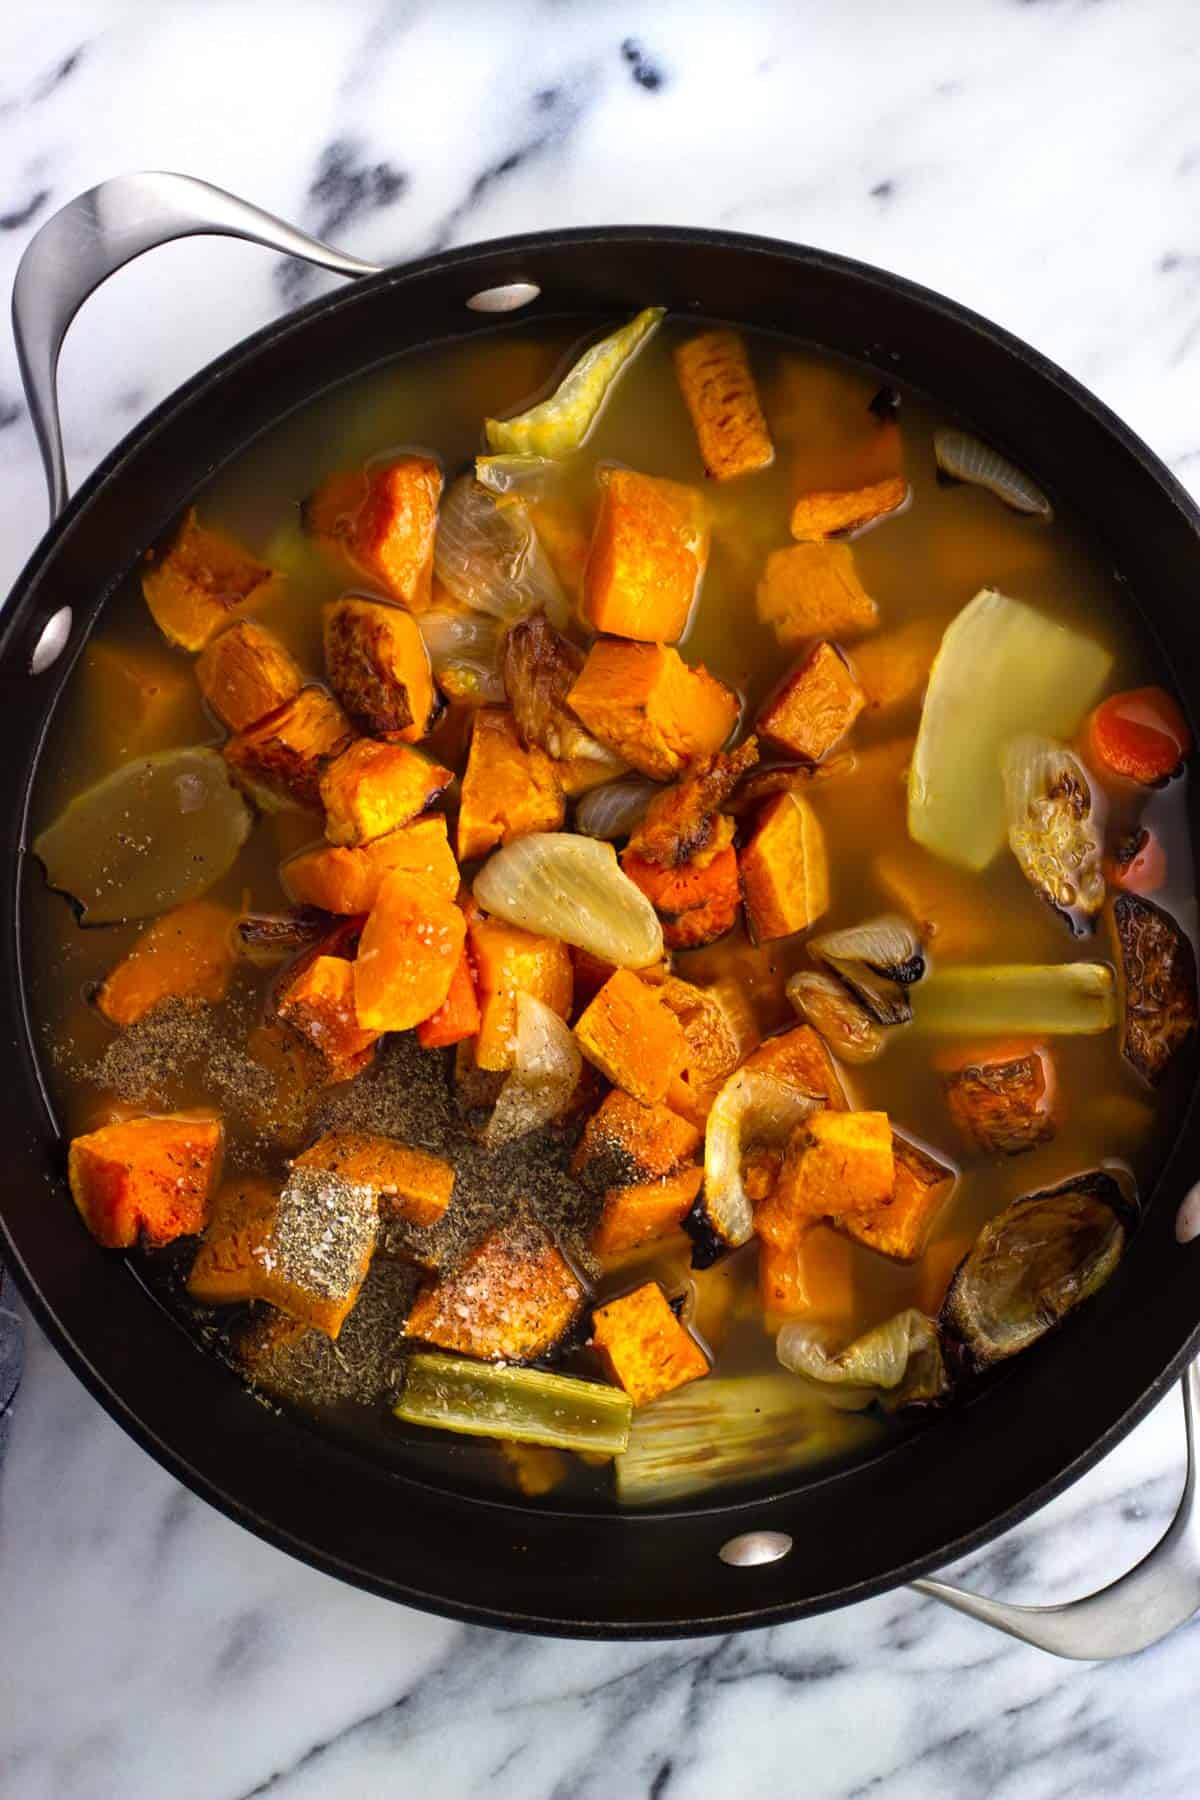 Roasted squash and other vegetables in a large pot with broth and spices.